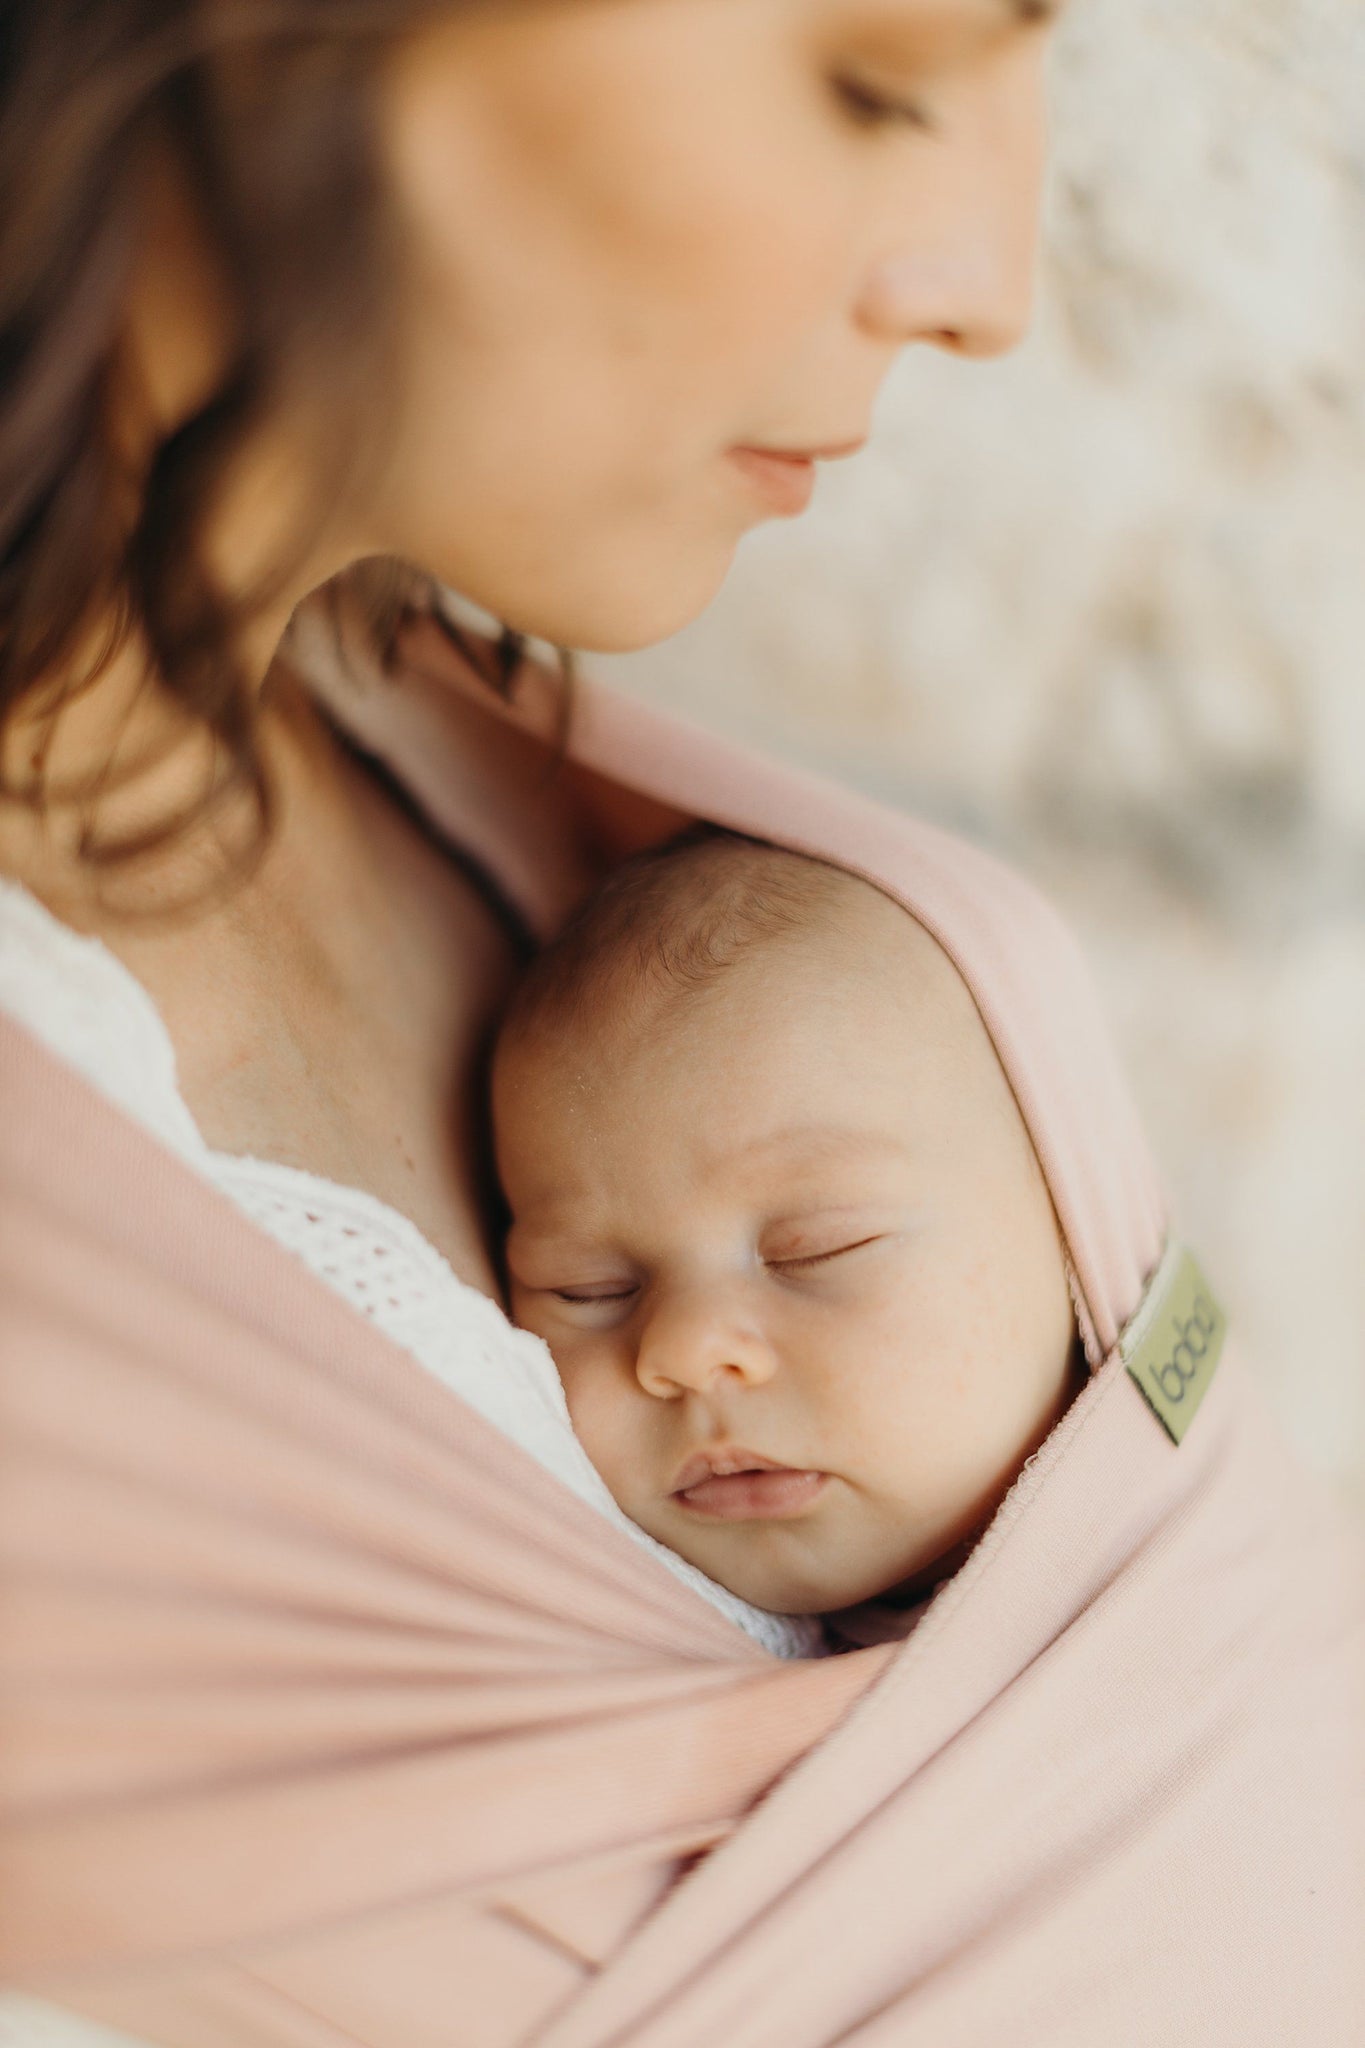 Get the perfect baby wrap for bonding with your little one! Our Boba Serenity Wrap is crafted from a buttery soft, breathable bamboo blend fabric and provides comfort and support for babies up to 35 lbs. Perfect for hands-free snuggling!